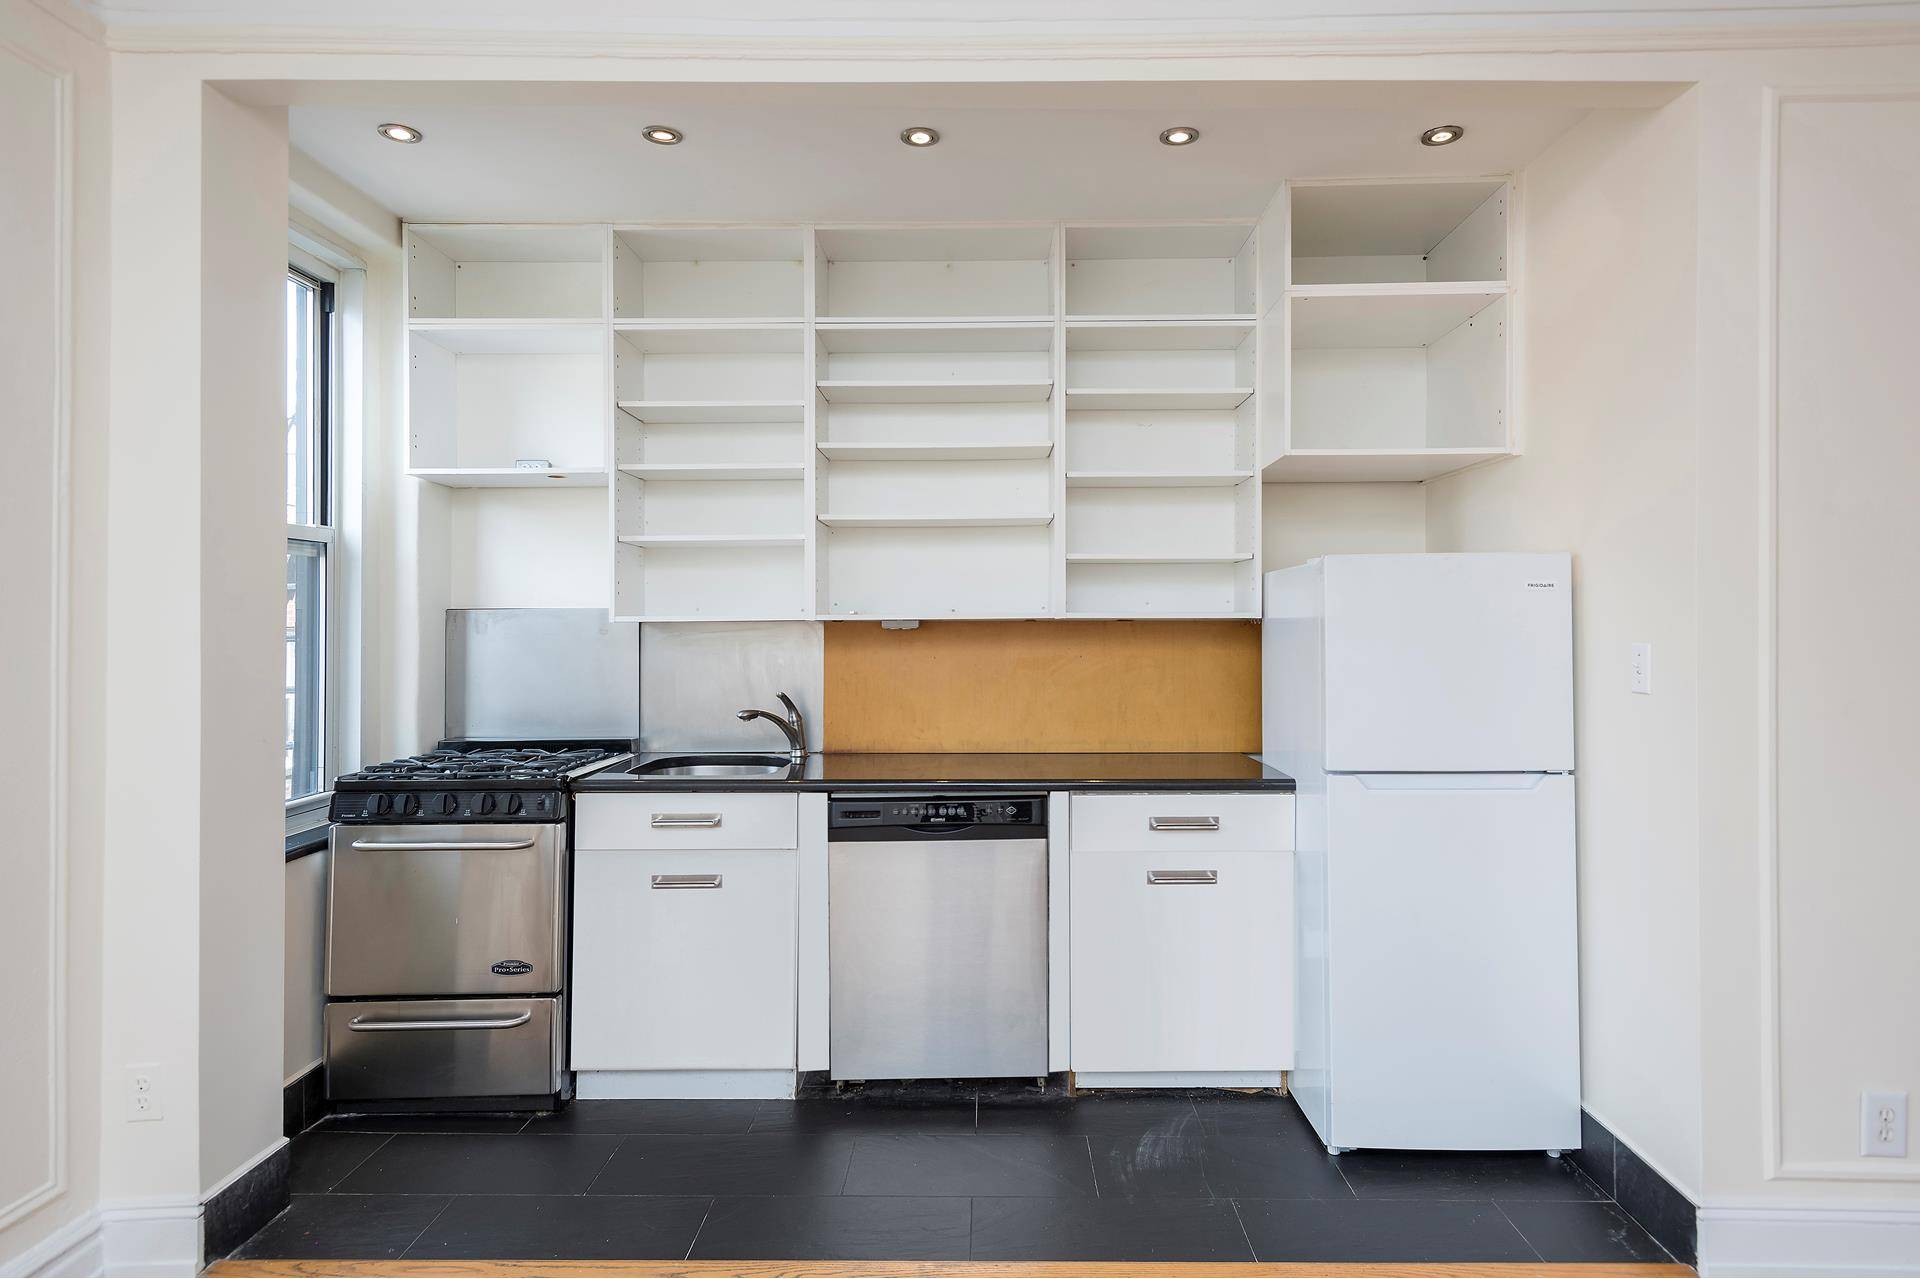 NEW RENTAL PRICE. Rent this terrific 2 BR, 2 full bath in Prime Brooklyn Heights.